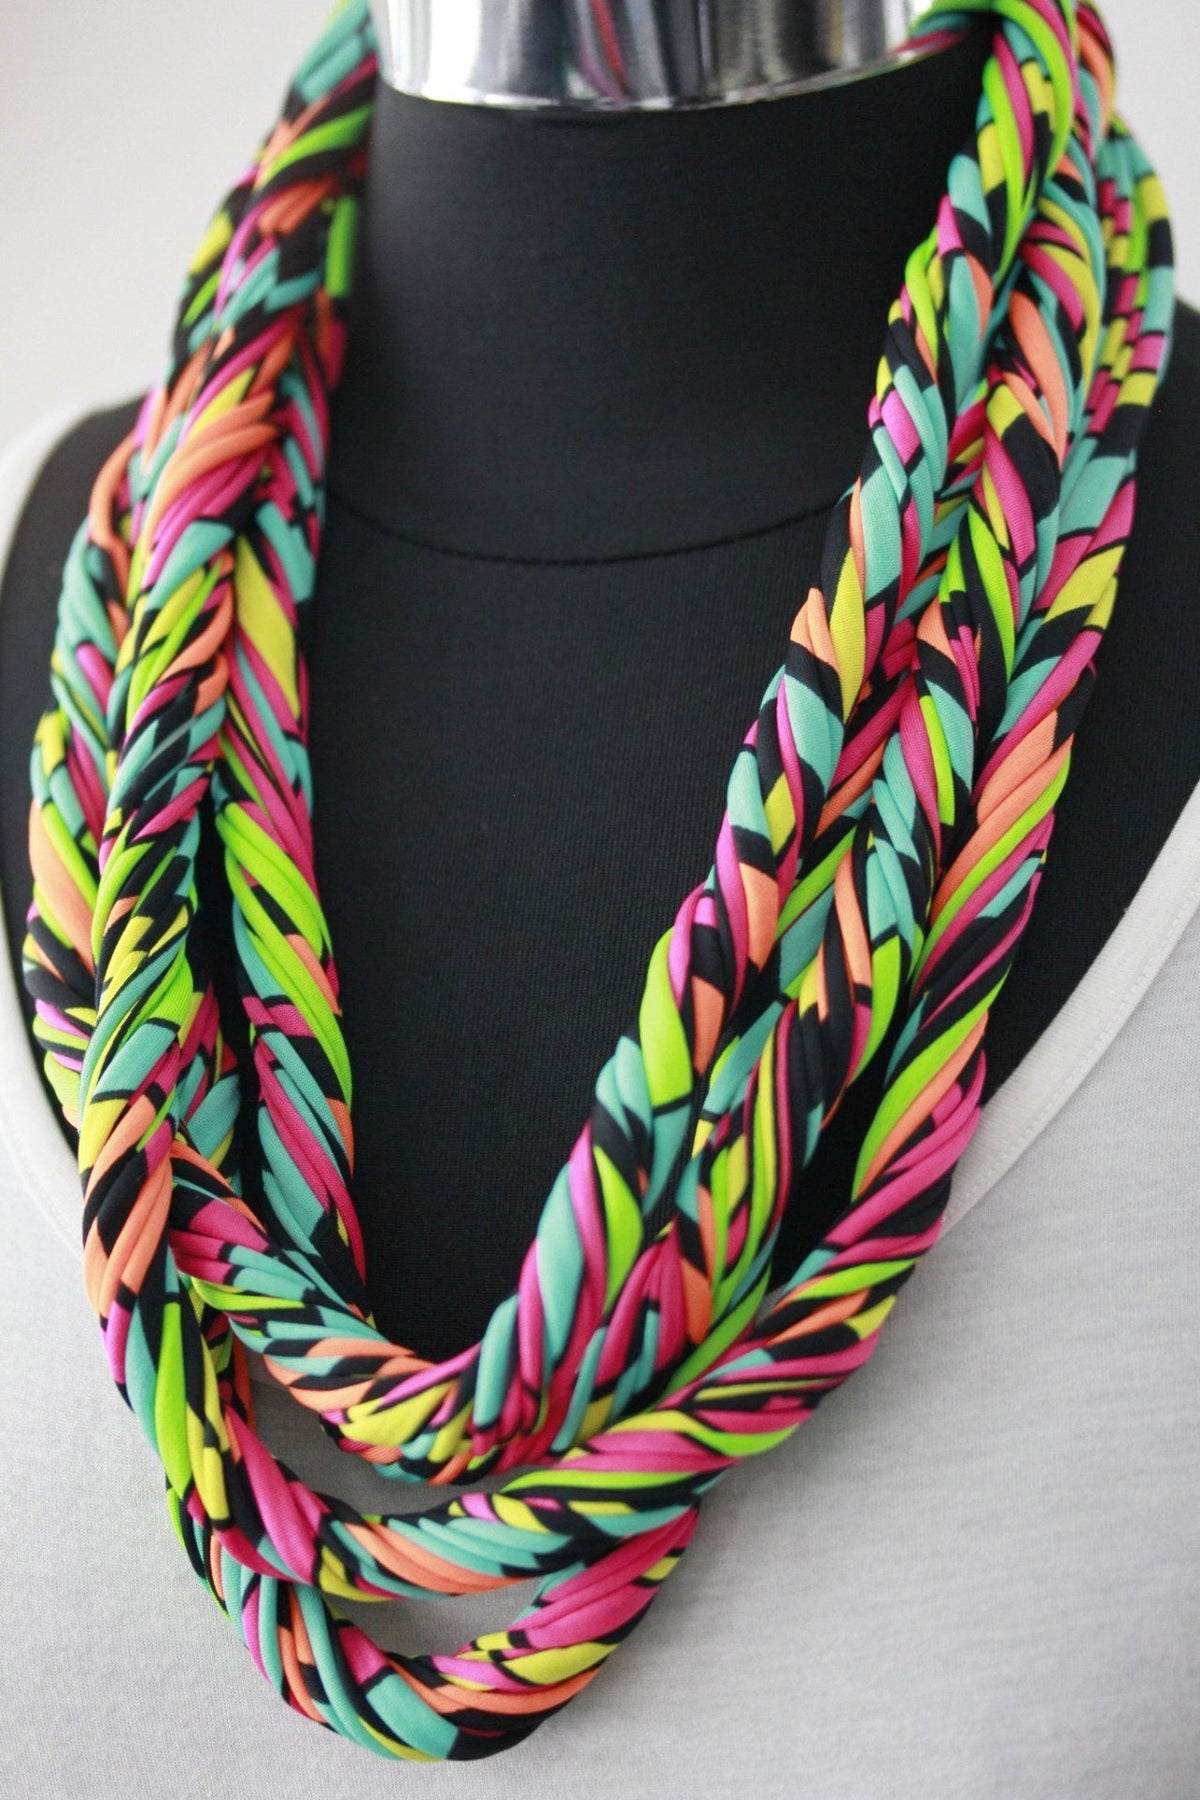 Handmade Neon Infinity Scarf Necklace, Scarf-lace, Not a tshirt Scarf for Women or Teens